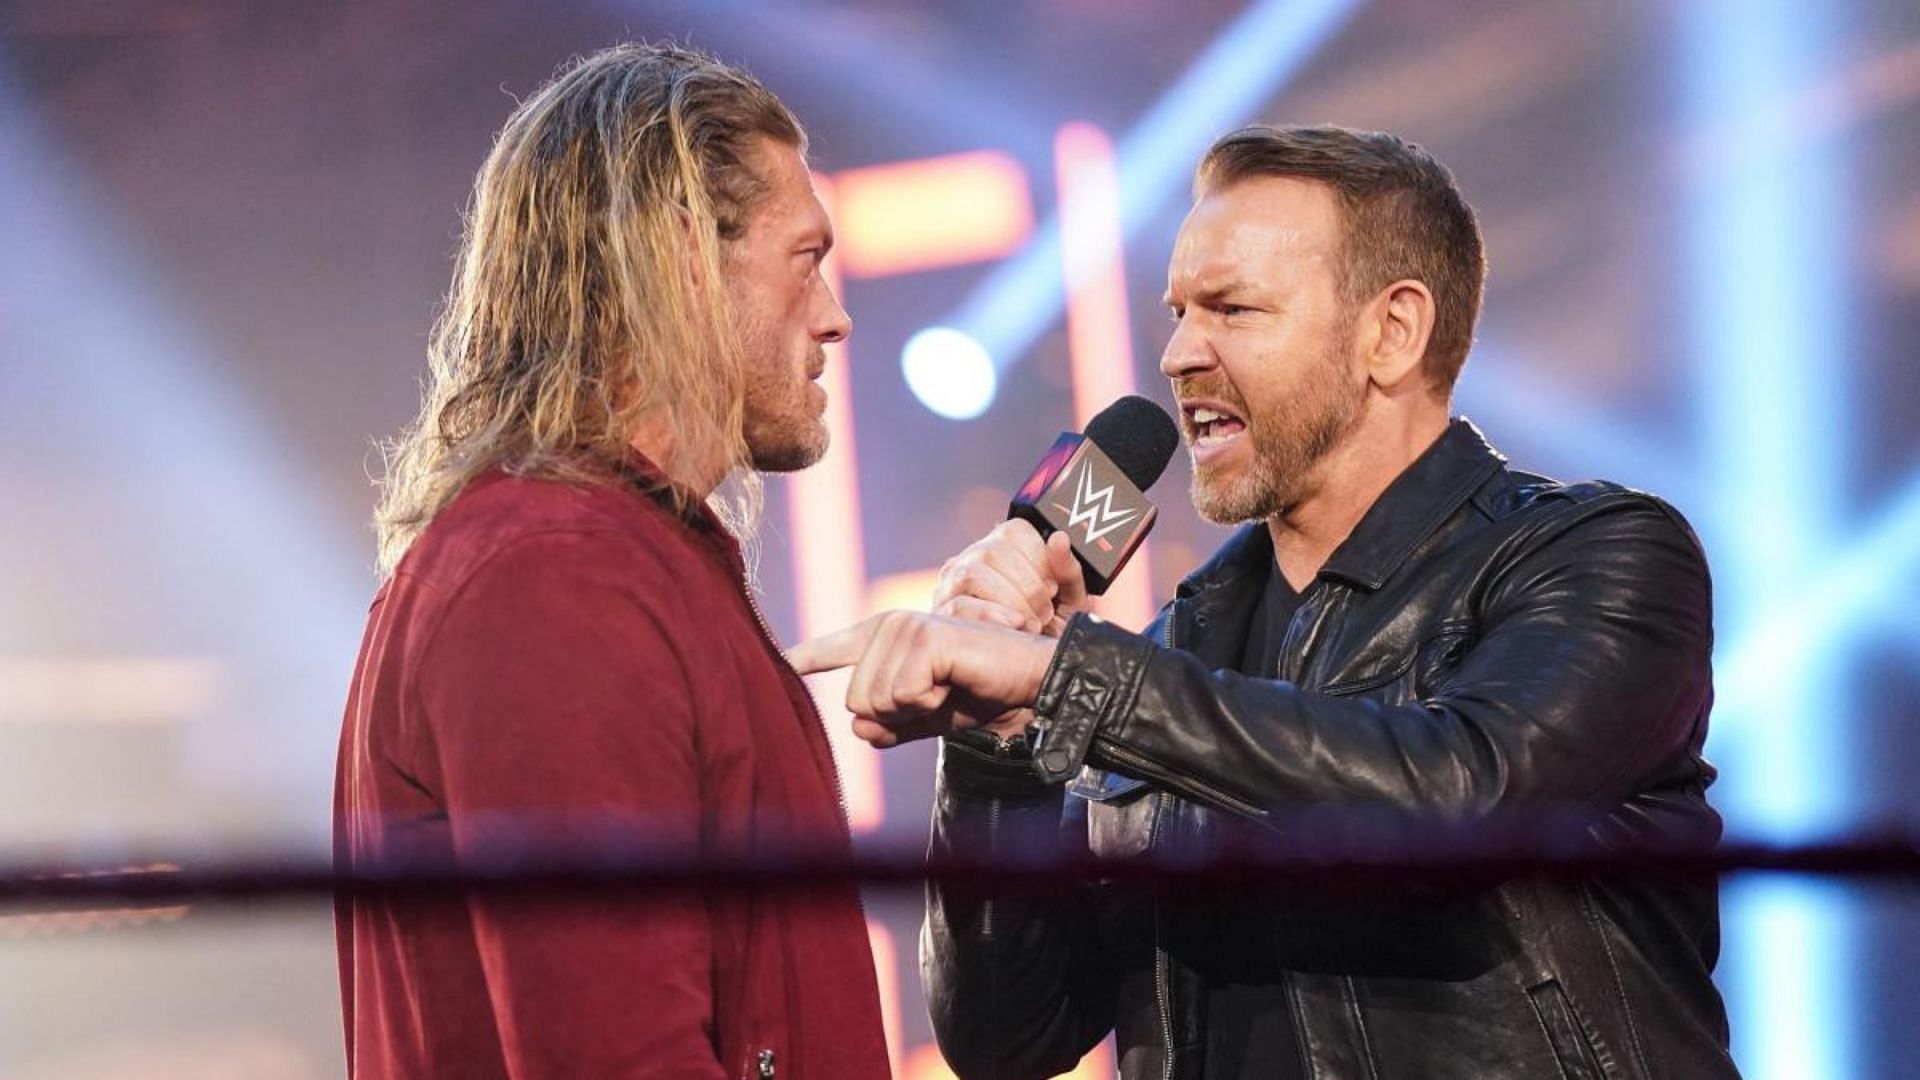 Christian Cage and Edge were former tag team partners